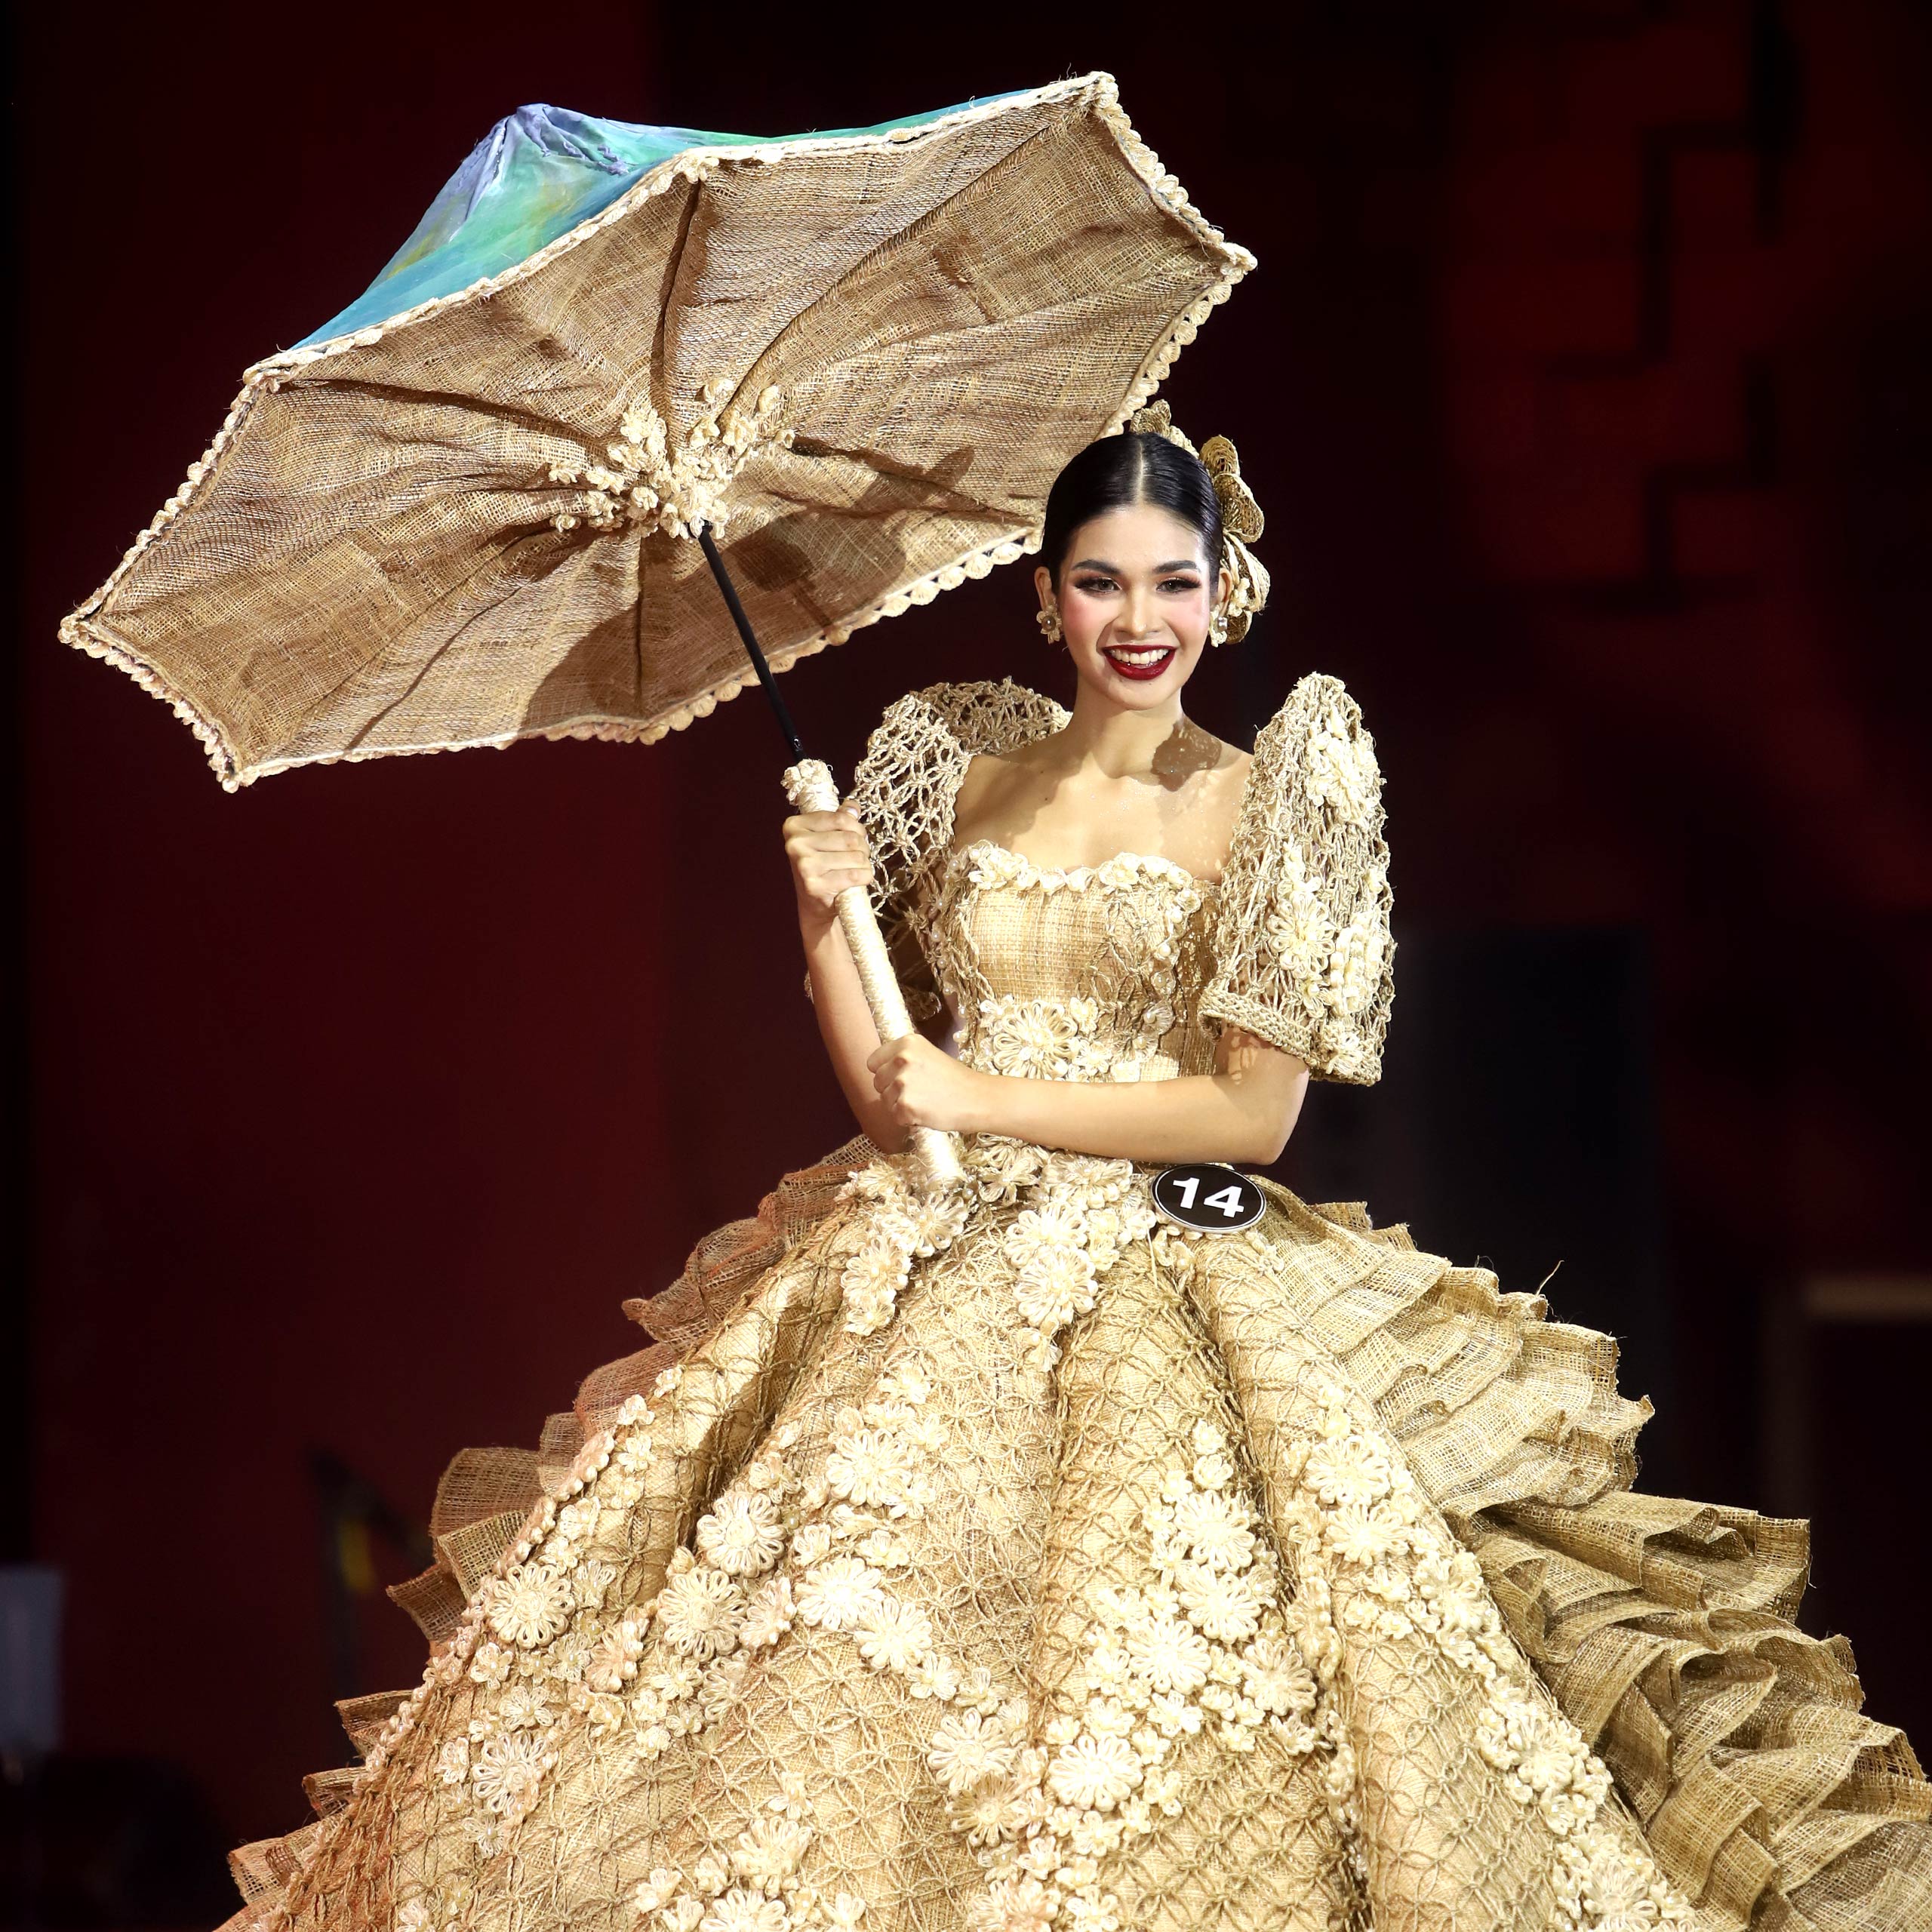 Binibining Pilipinas 2023 National Costumes Highlighted Cultural Themes